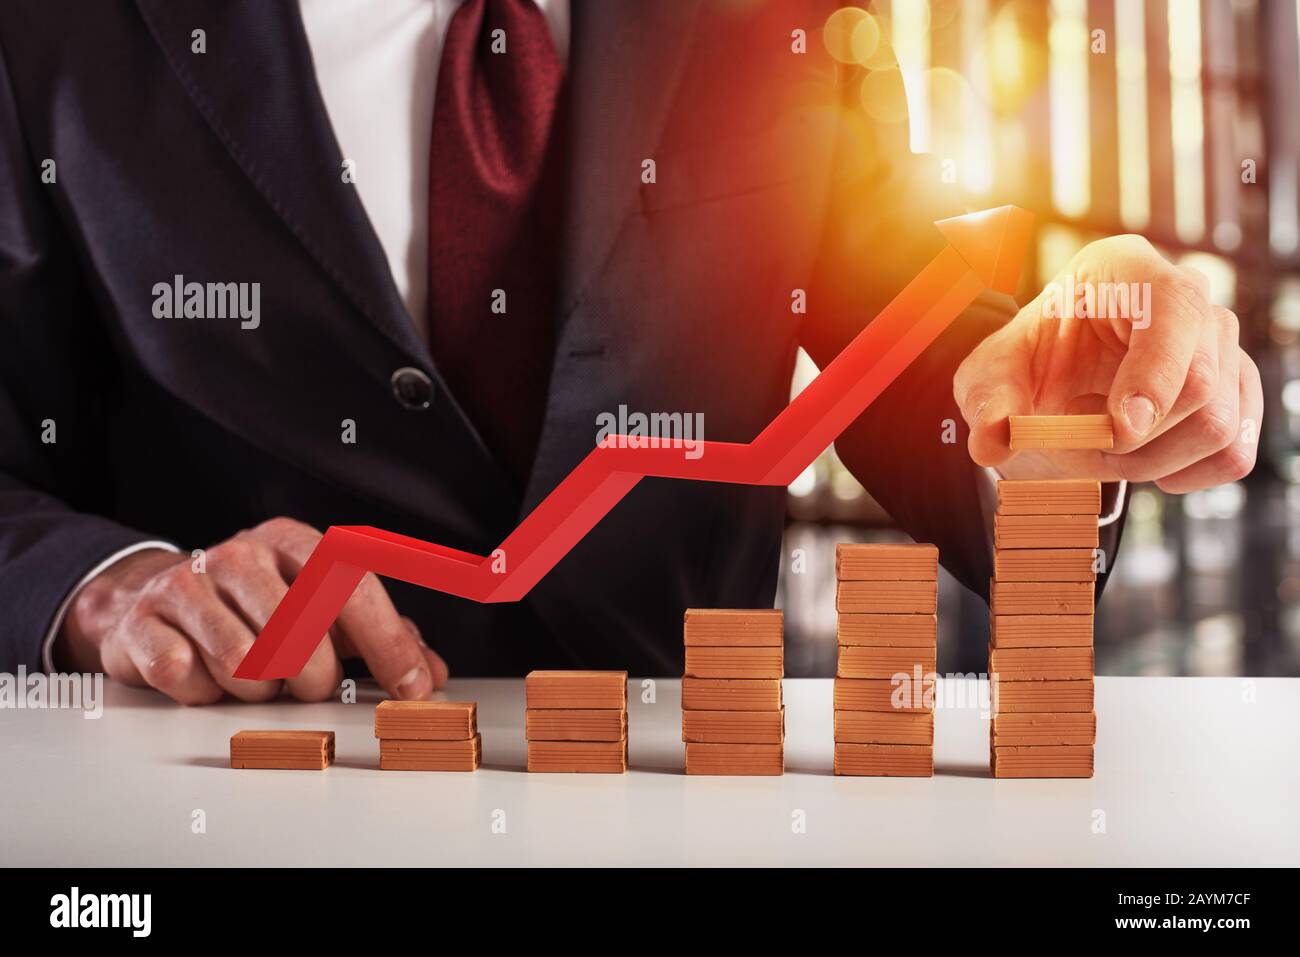 Businessman adds a brick to grow financial trend. Red arrow shows the growth. Concept of success, statistic and profit Stock Photo